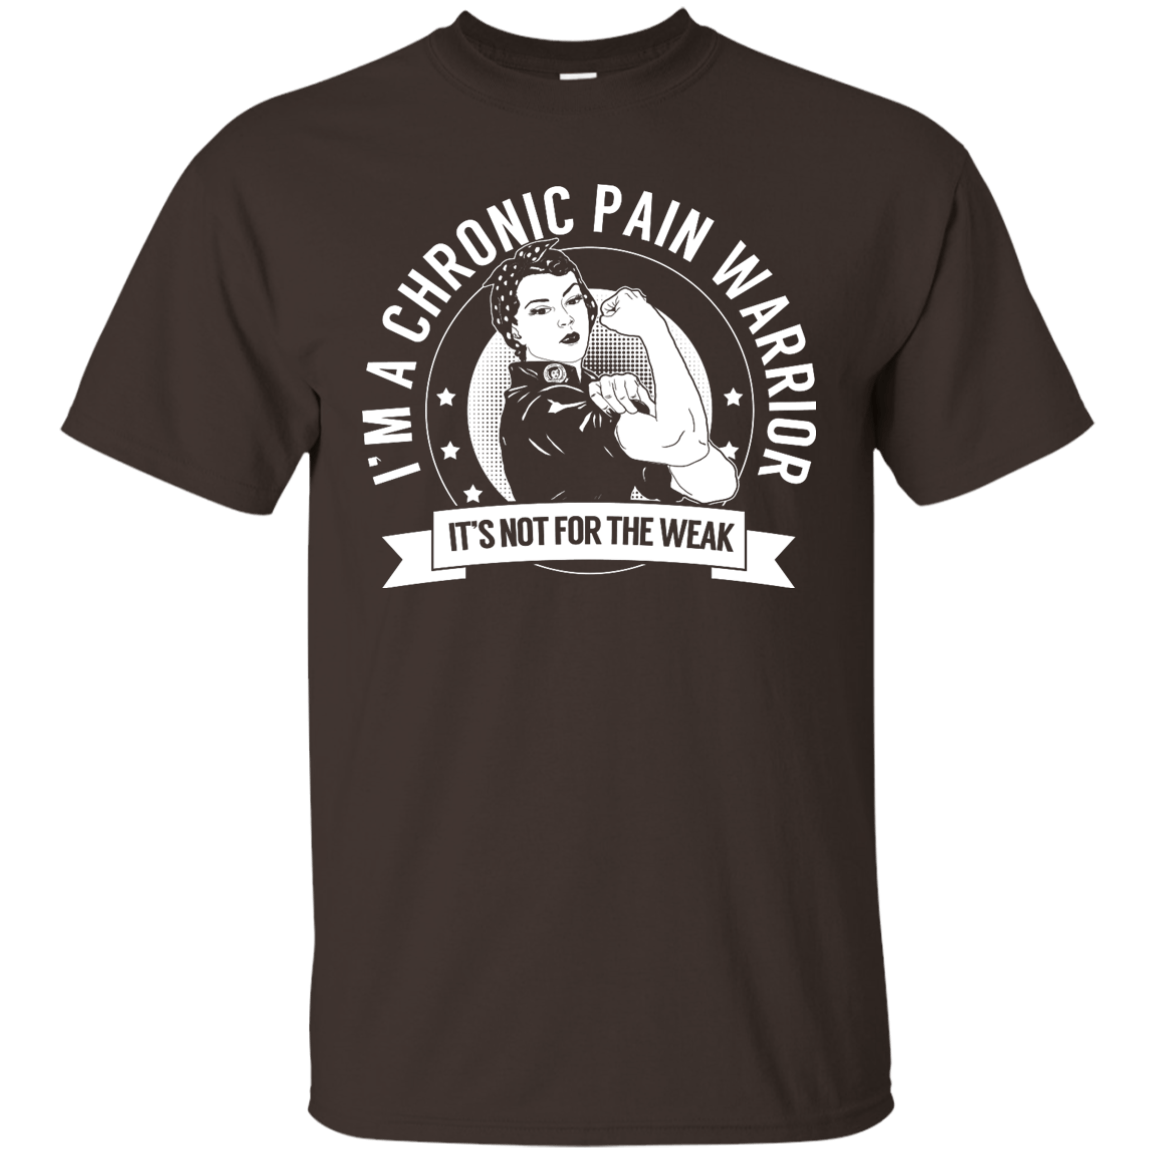 Chronic Pain Warrior Not For The Weak Unisex Shirt - The Unchargeables